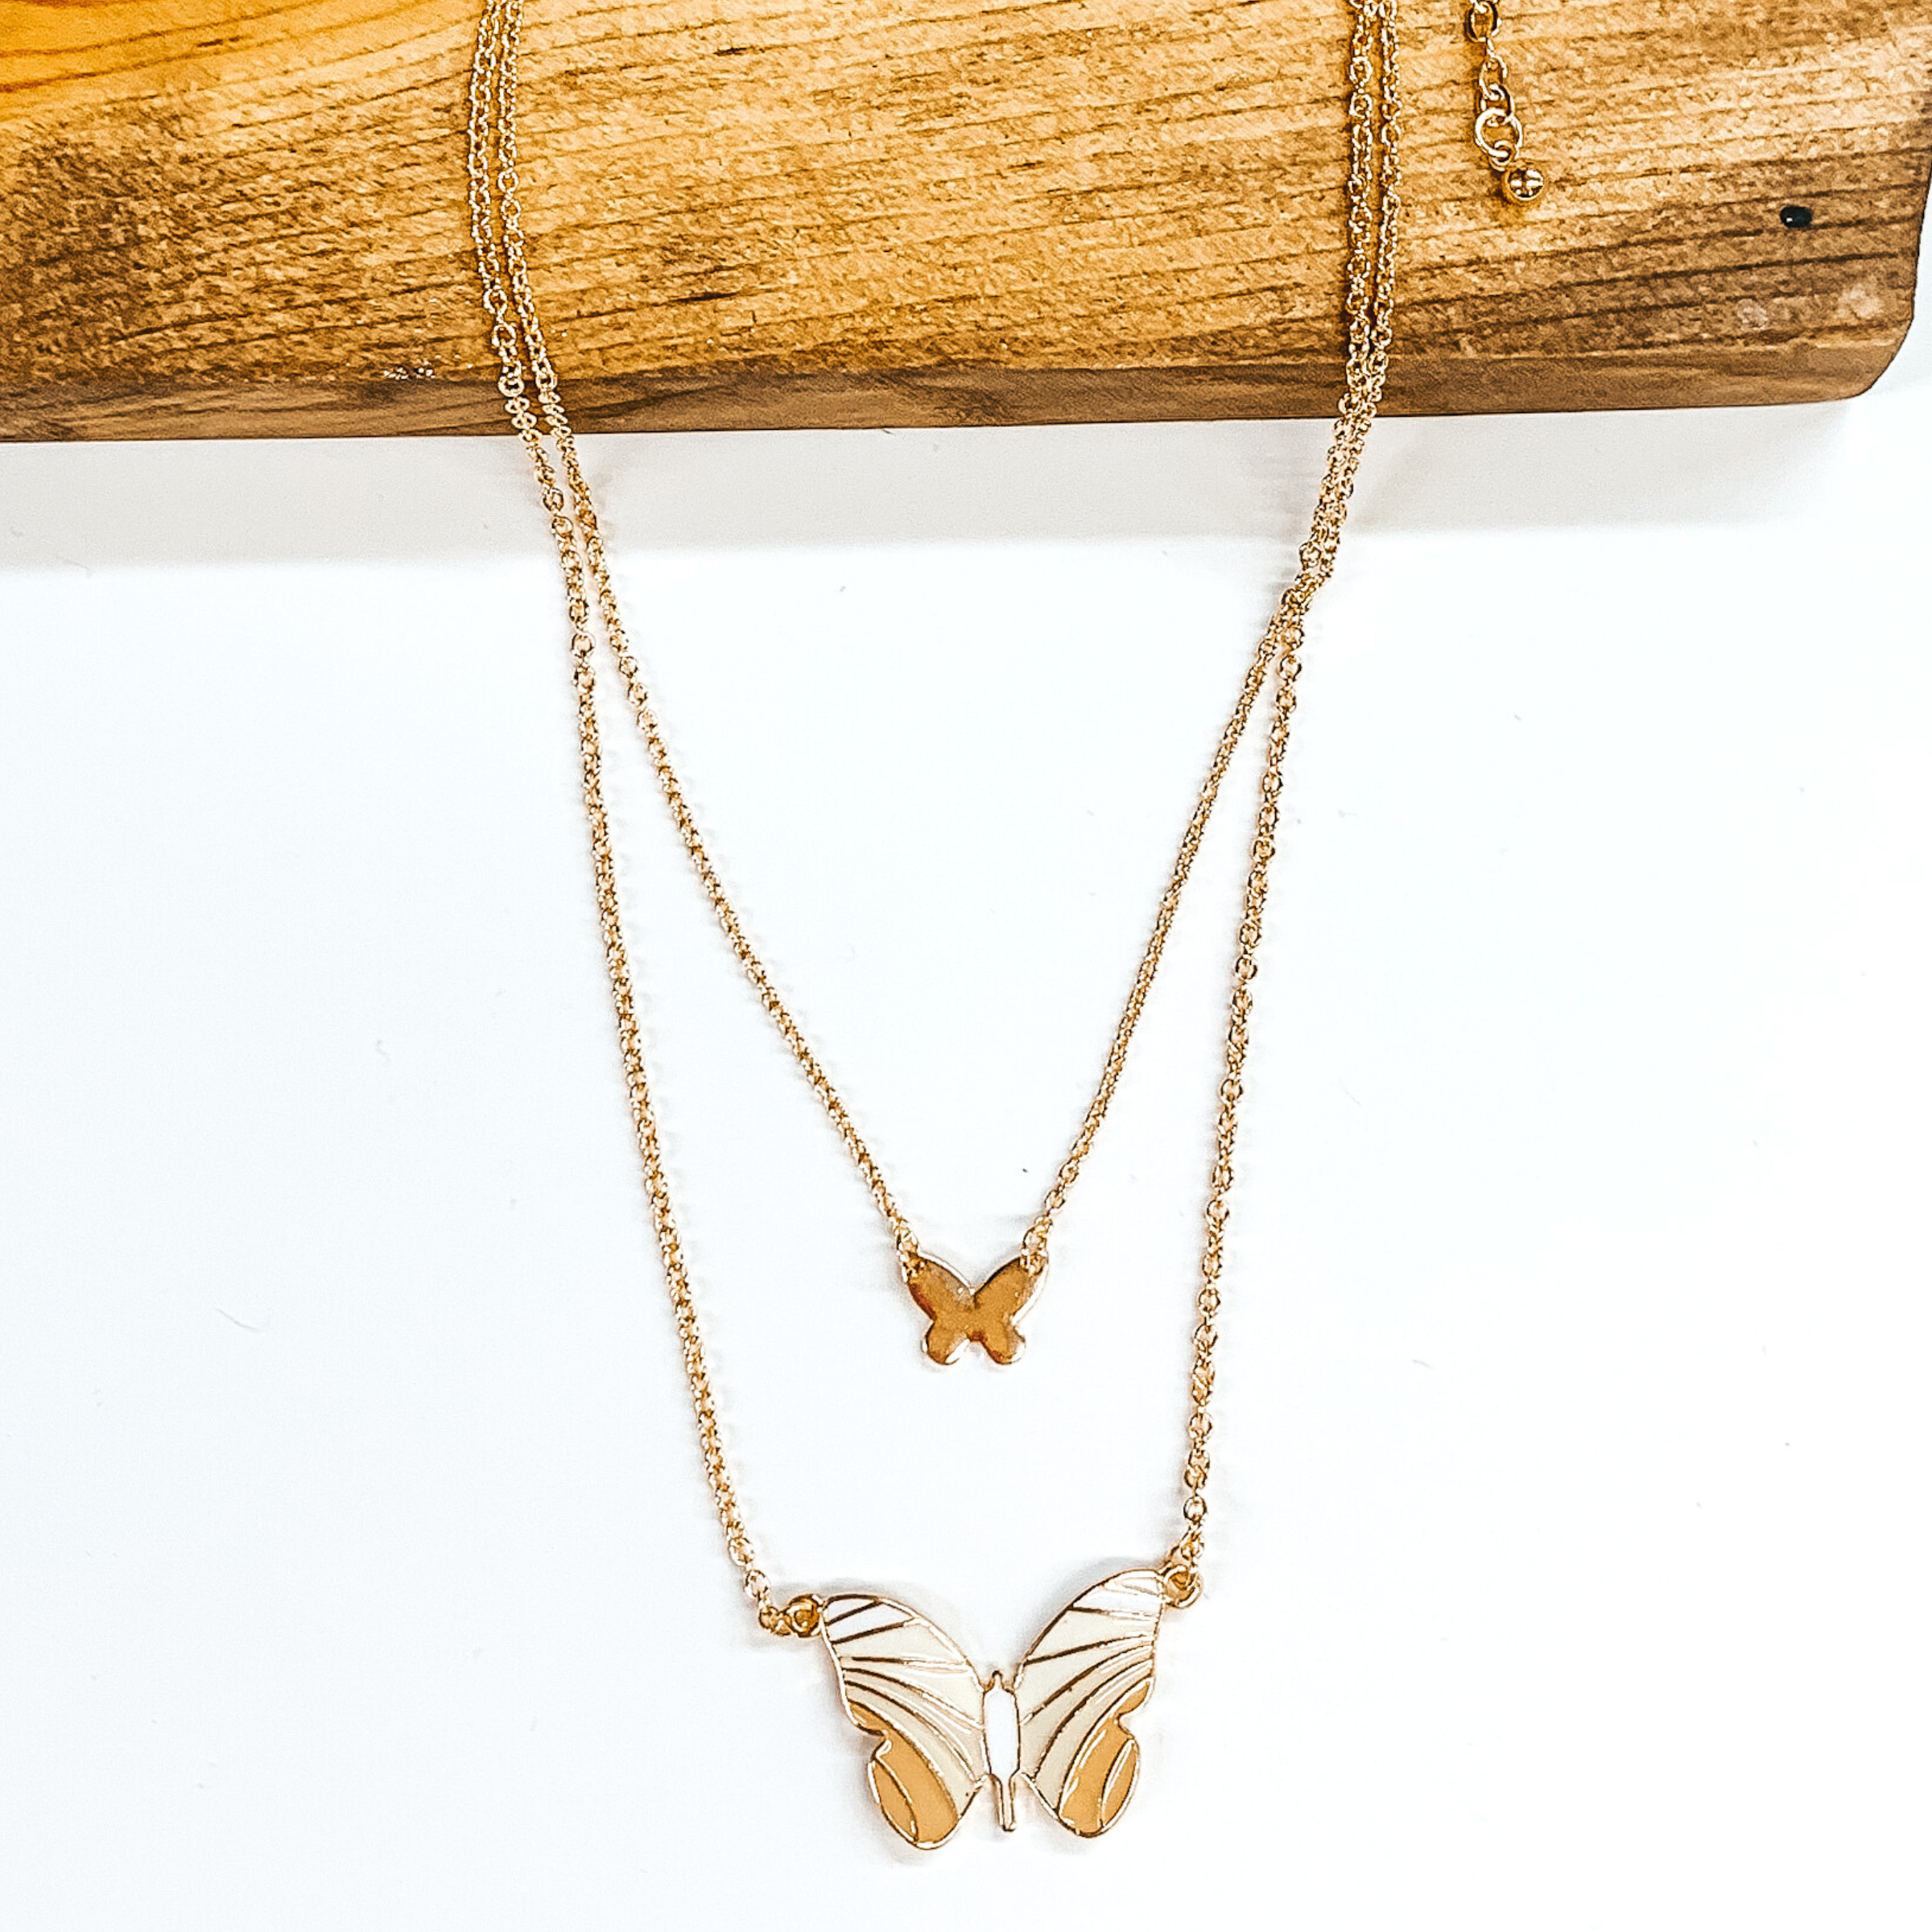 Double Gold Chain Necklace with a Butterfly Pendant in Ivory - Giddy Up Glamour Boutique